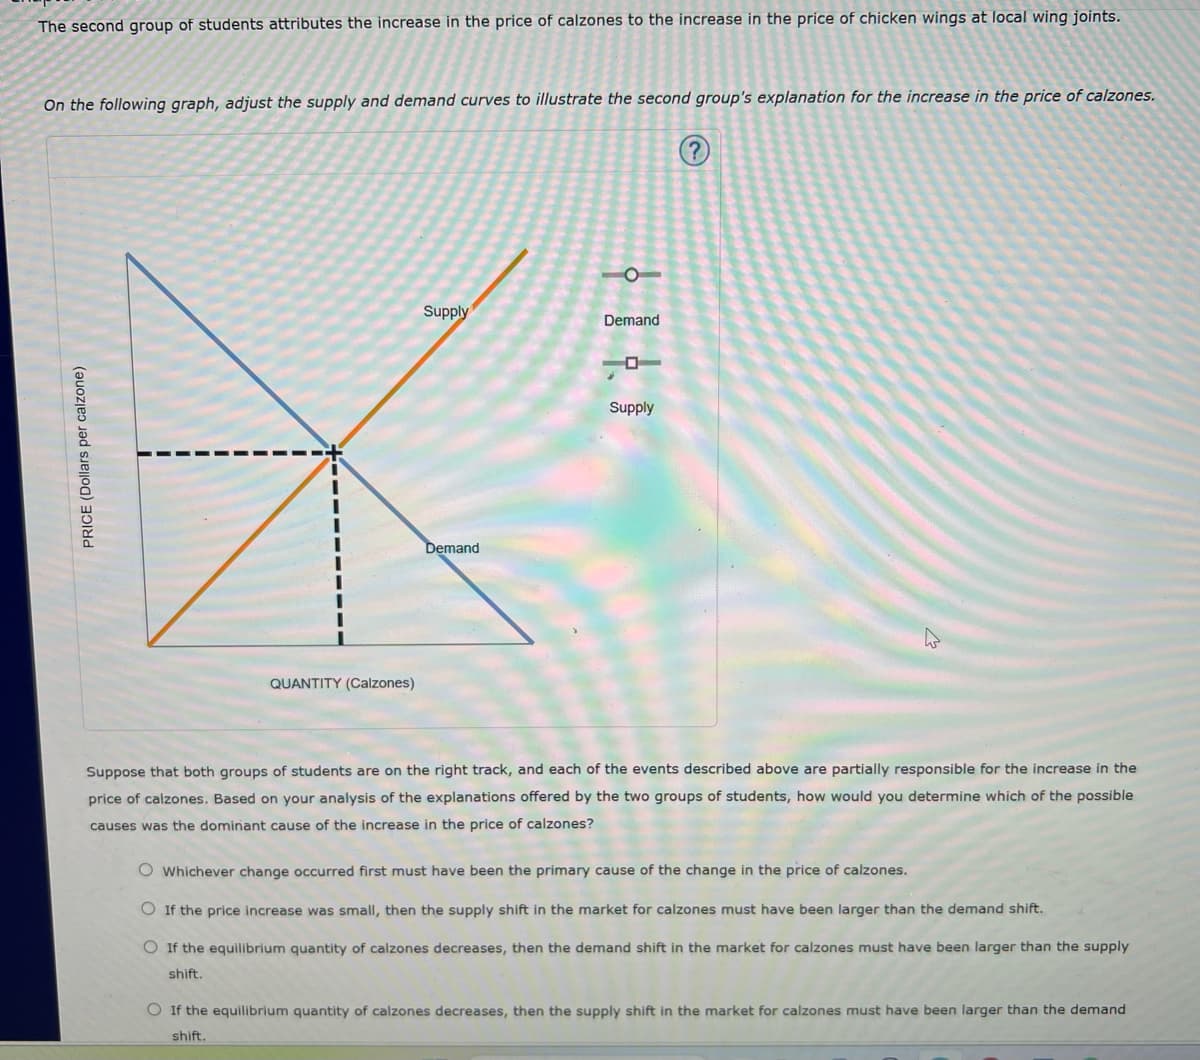 The second group of students attributes the increase in the price of calzones to the increase in the price of chicken wings at local wing joints.
On the following graph, adjust the supply and demand curves to illustrate the second group's explanation for the increase in the price of calzones.
(?
PRICE (Dollars per calzone)
QUANTITY (Calzones)
Supply
Demand
Demand
Supply
Suppose that both groups of students are on the right track, and each of the events described above are partially responsible for the increase in the
price of calzones. Based on your analysis of the explanations offered by the two groups of students, how would you determine which of the possible
causes was the dominant cause of the increase in the price of calzones?
O Whichever change occurred first must have been the primary cause of the change in the price of calzones.
If the price increase was small, then the supply shift in the market for calzones must have been larger than the demand shift.
O If the equilibrium quantity of calzones decreases, then the demand shift in the market for calzones must have been larger than the supply
shift.
If the equilibrium quantity of calzones decreases, then the supply shift in the market for calzones must have been larger than the demand
shift.